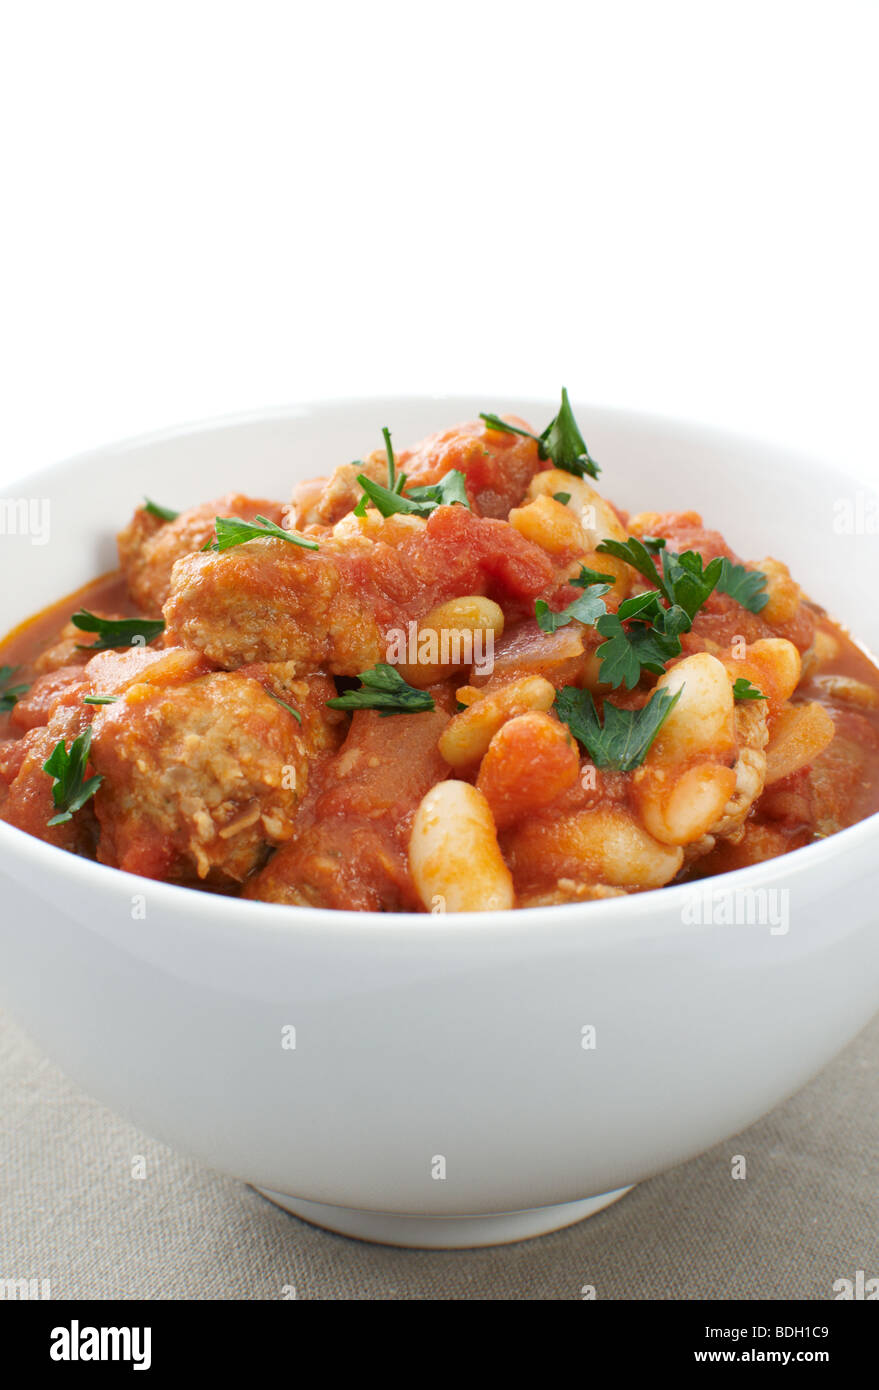 Duck and pork sausage cassoulet, with cannellini and flageolet beans garnished with parsley Stock Photo